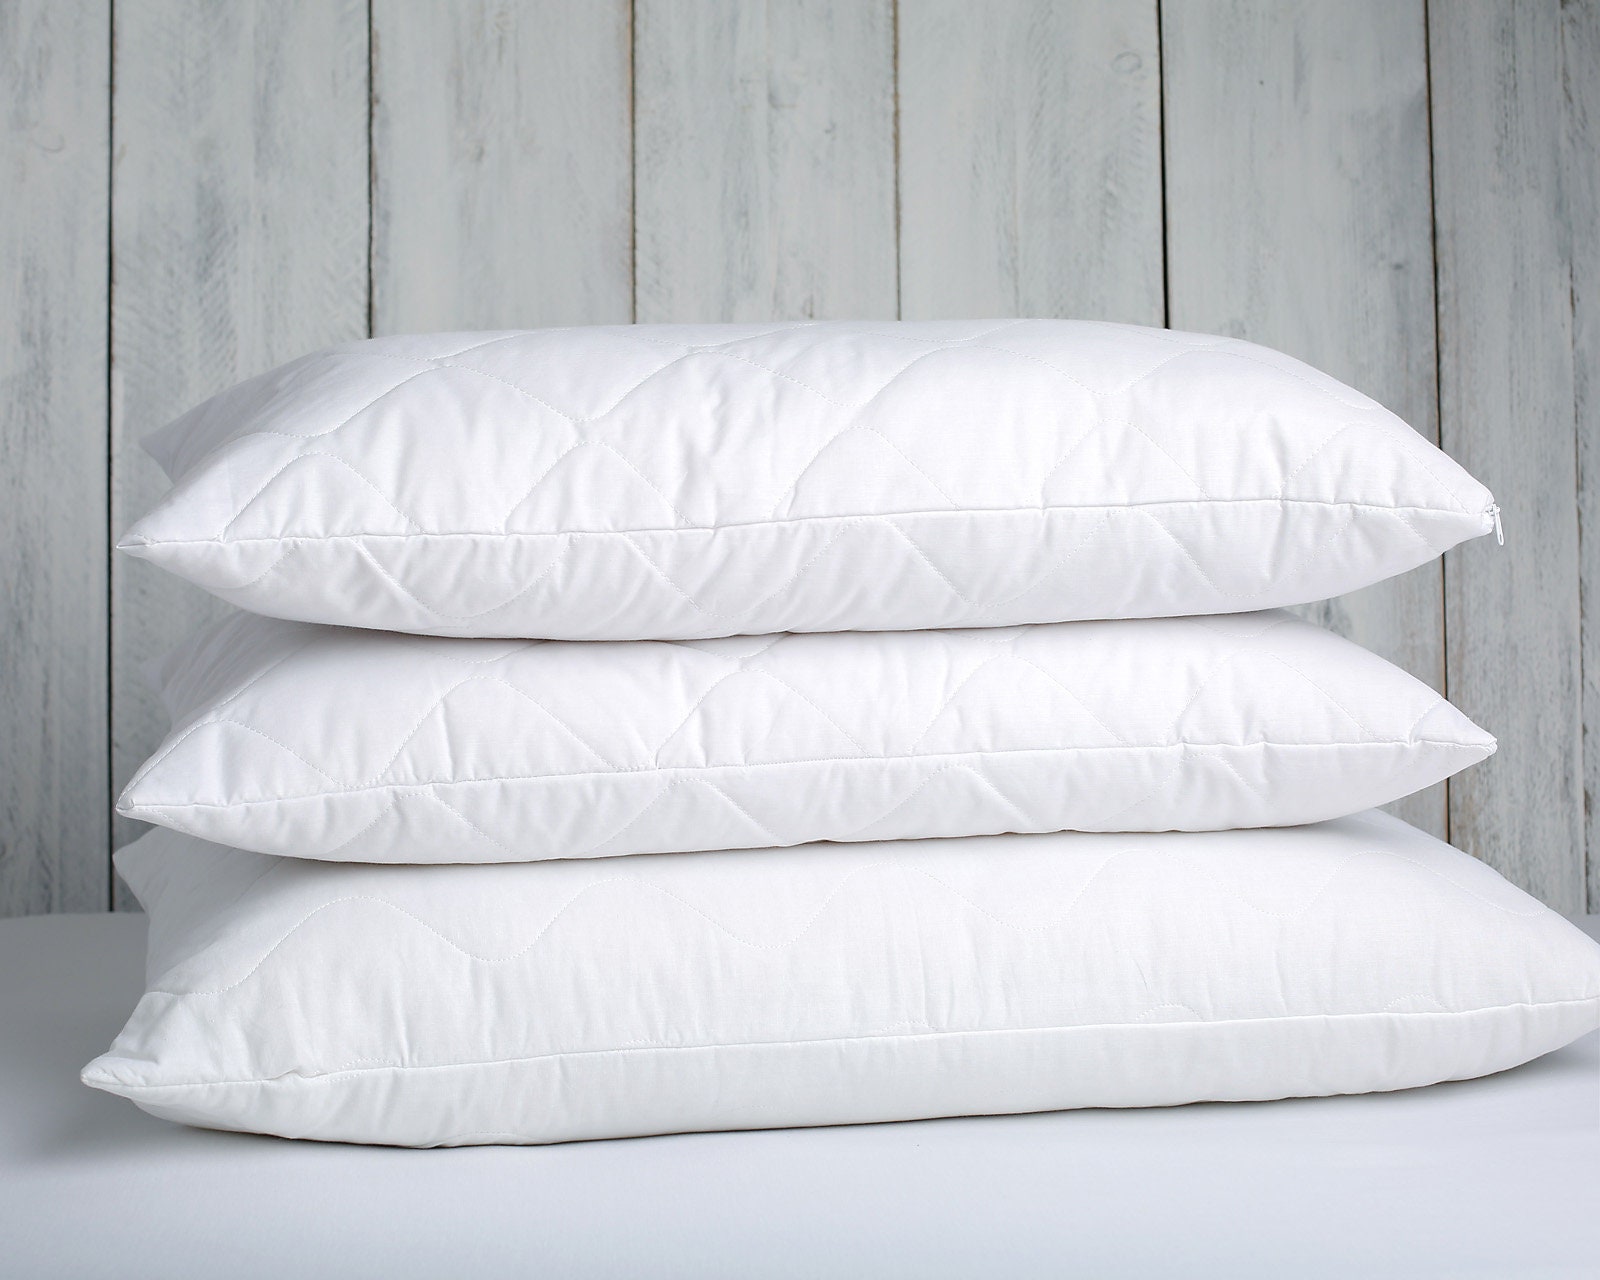 Pack of Two Merino Wool Pillows  45x75cm Bed Standard WOOL FILLED PILLOW SALE